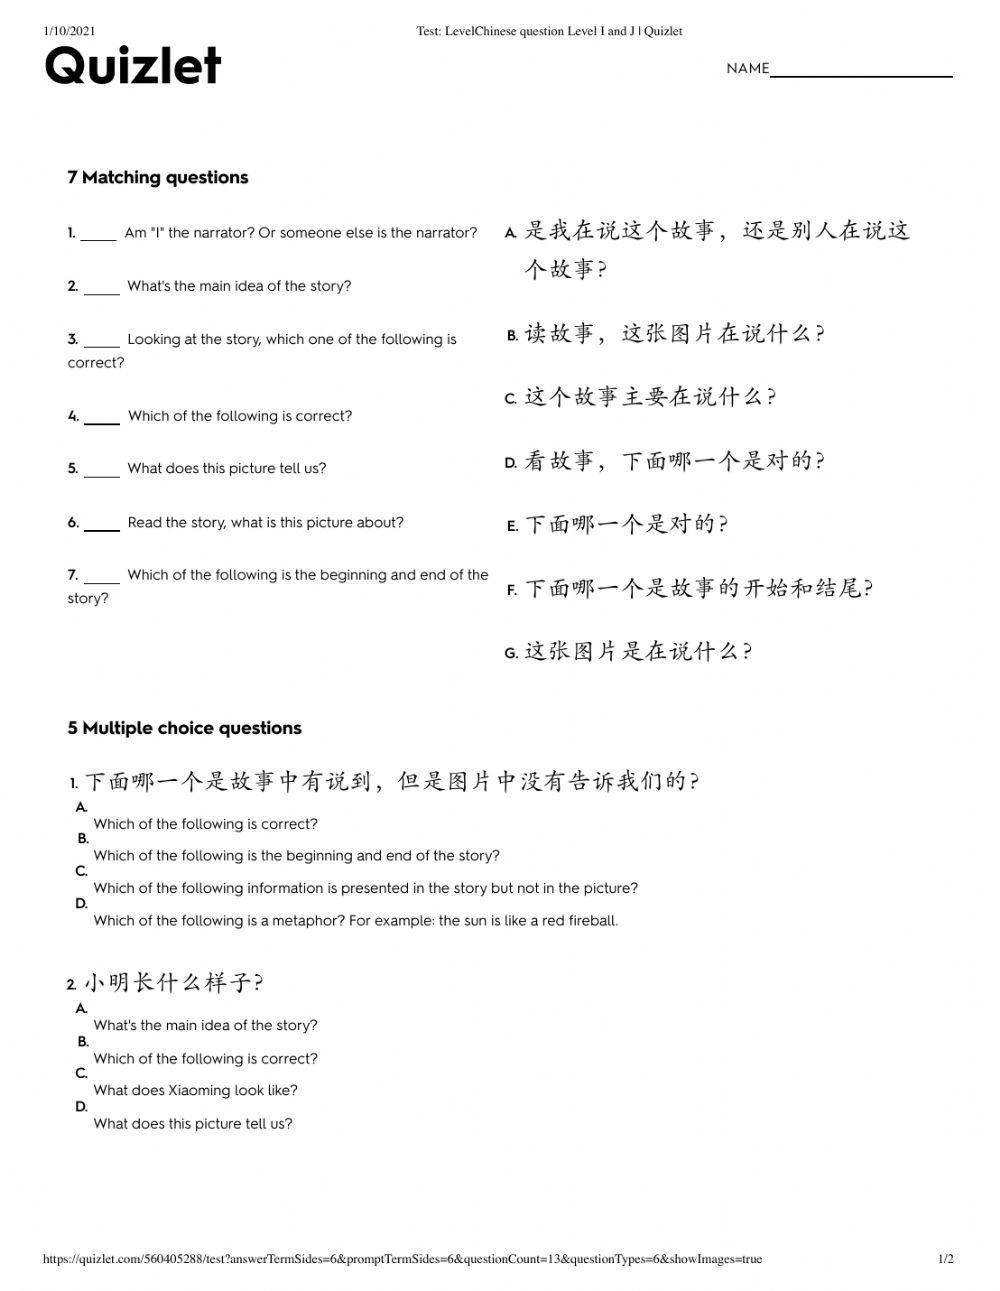 LevelChinese questions Level I and J